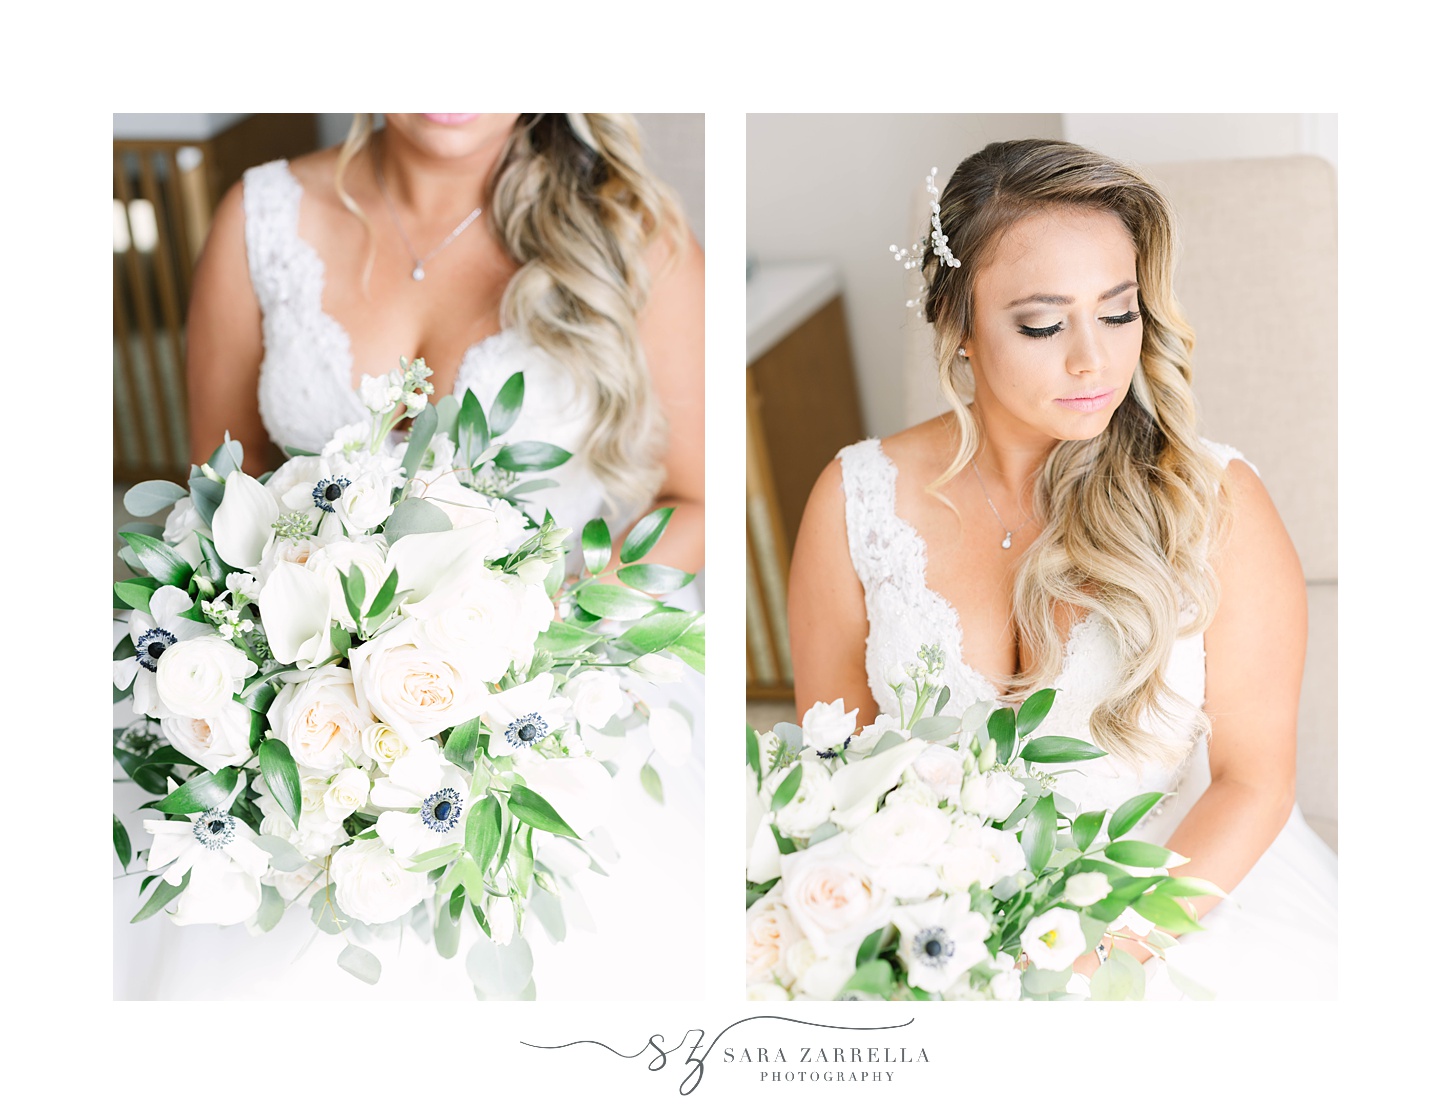 bride sits with bouquet of white flowers during photos before wedding day